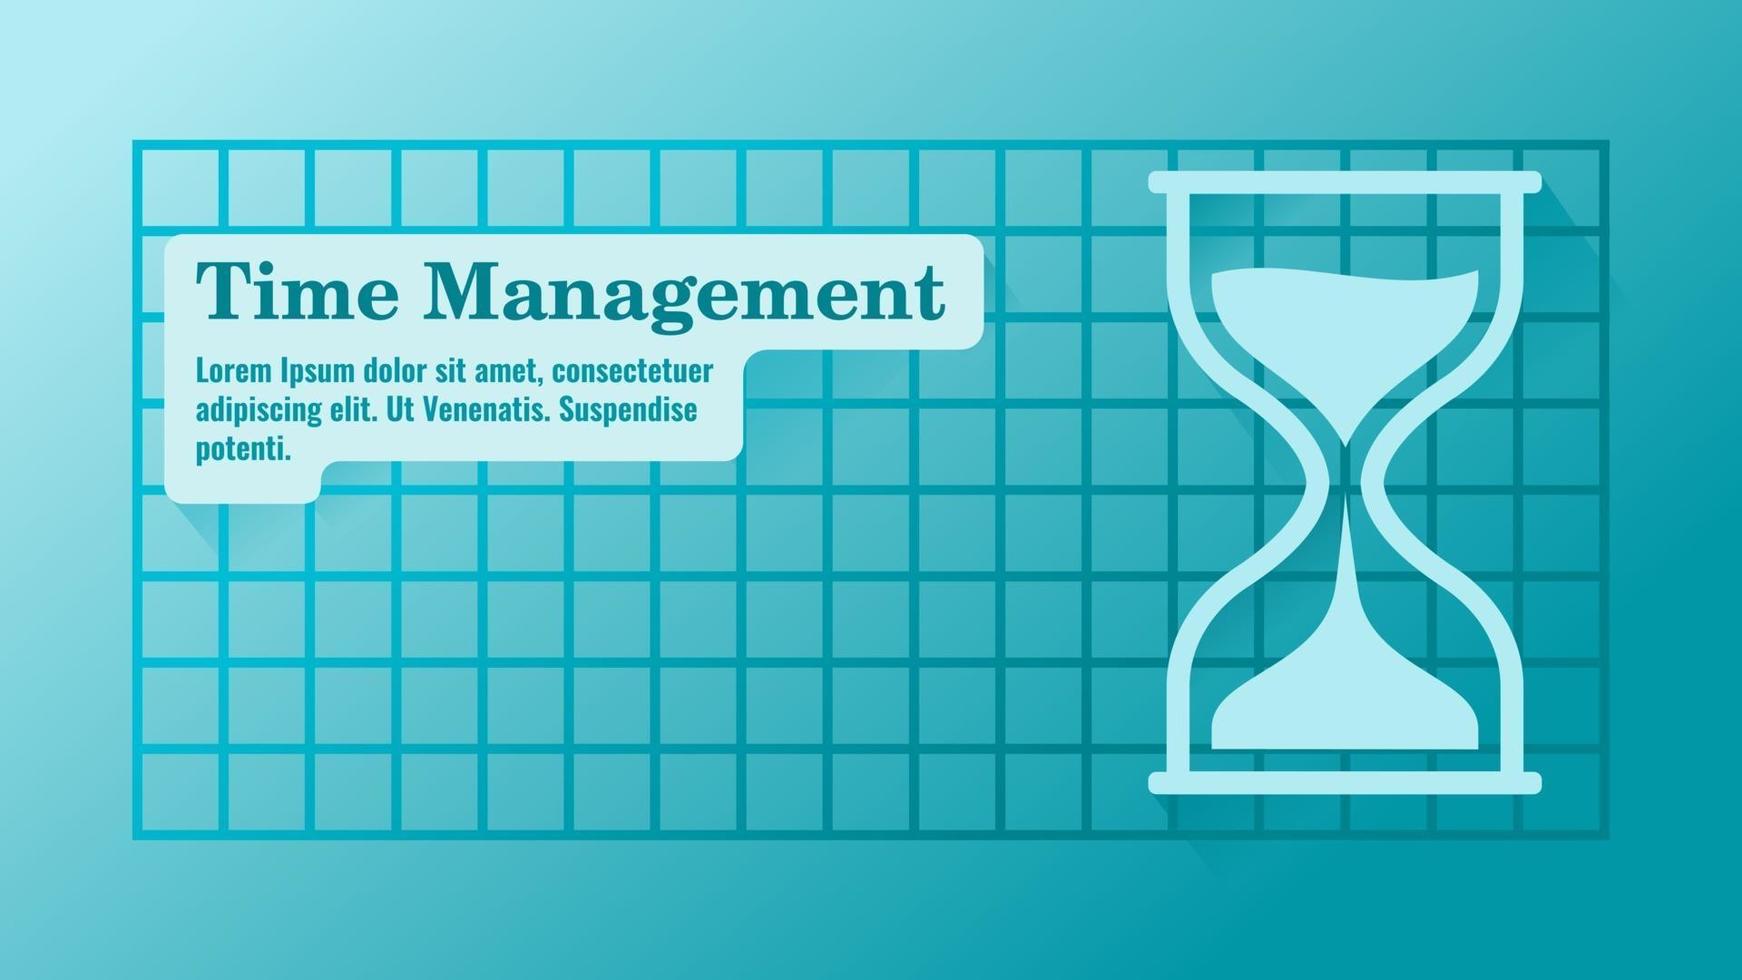 Time Management with Hourglass Presentation Template vector